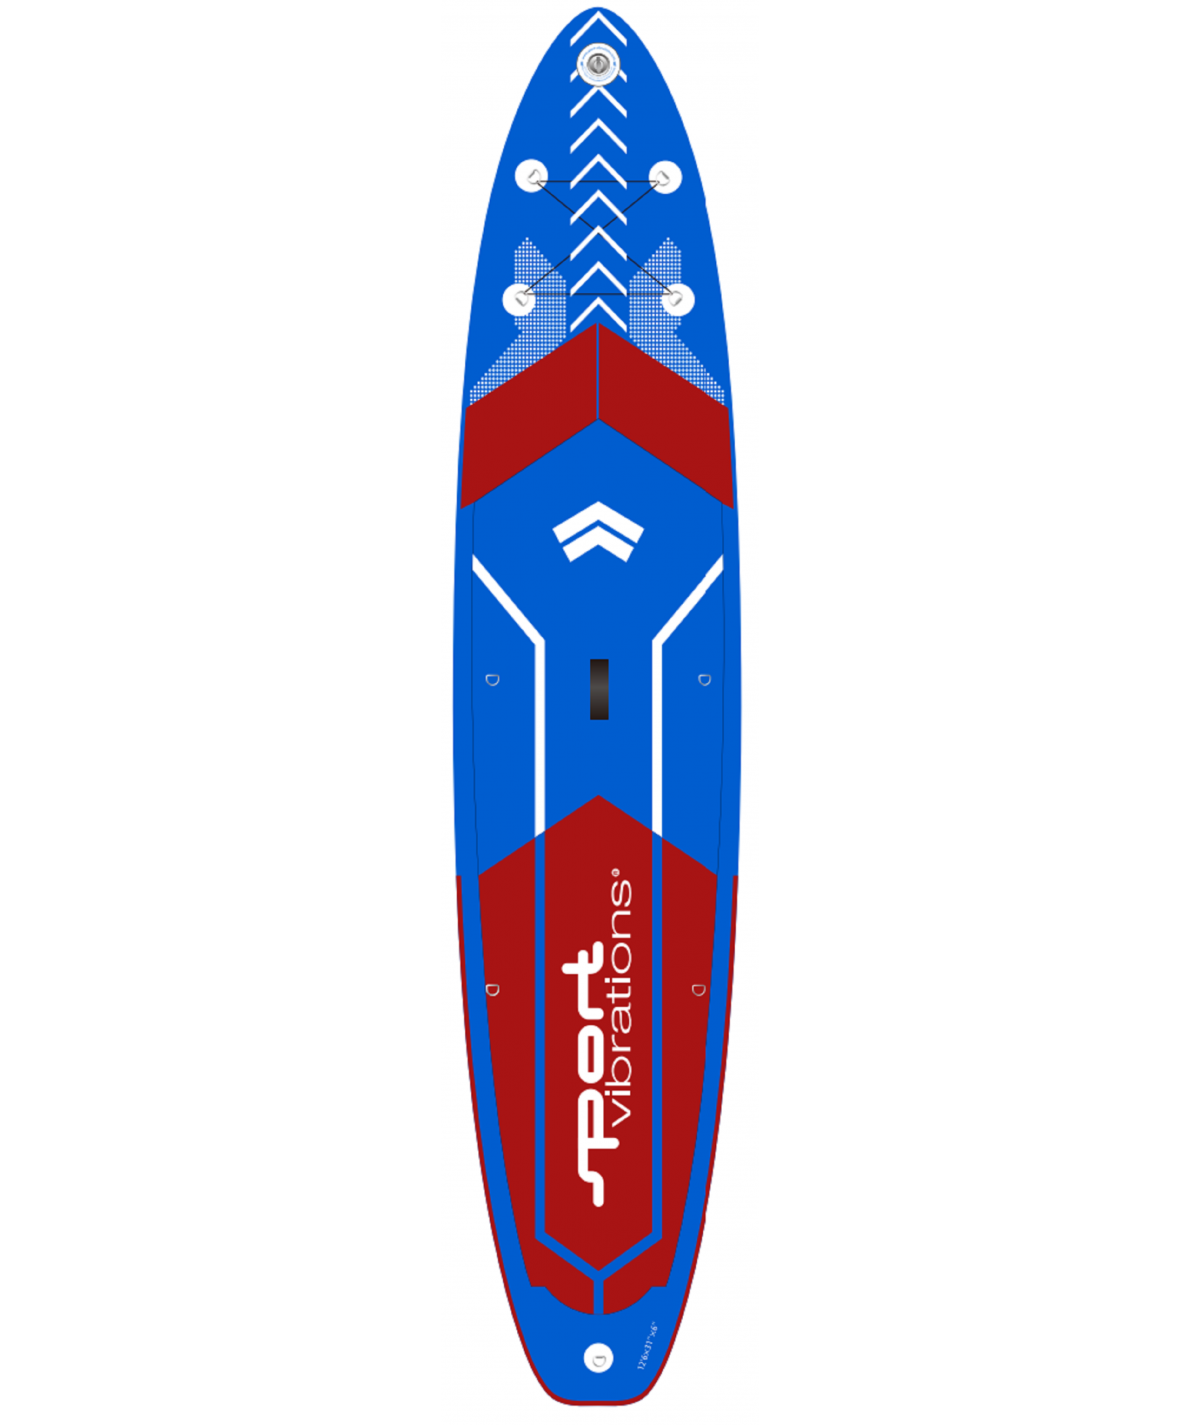 Sport-Vibrations All-Terrain Touring 12'6 SUP